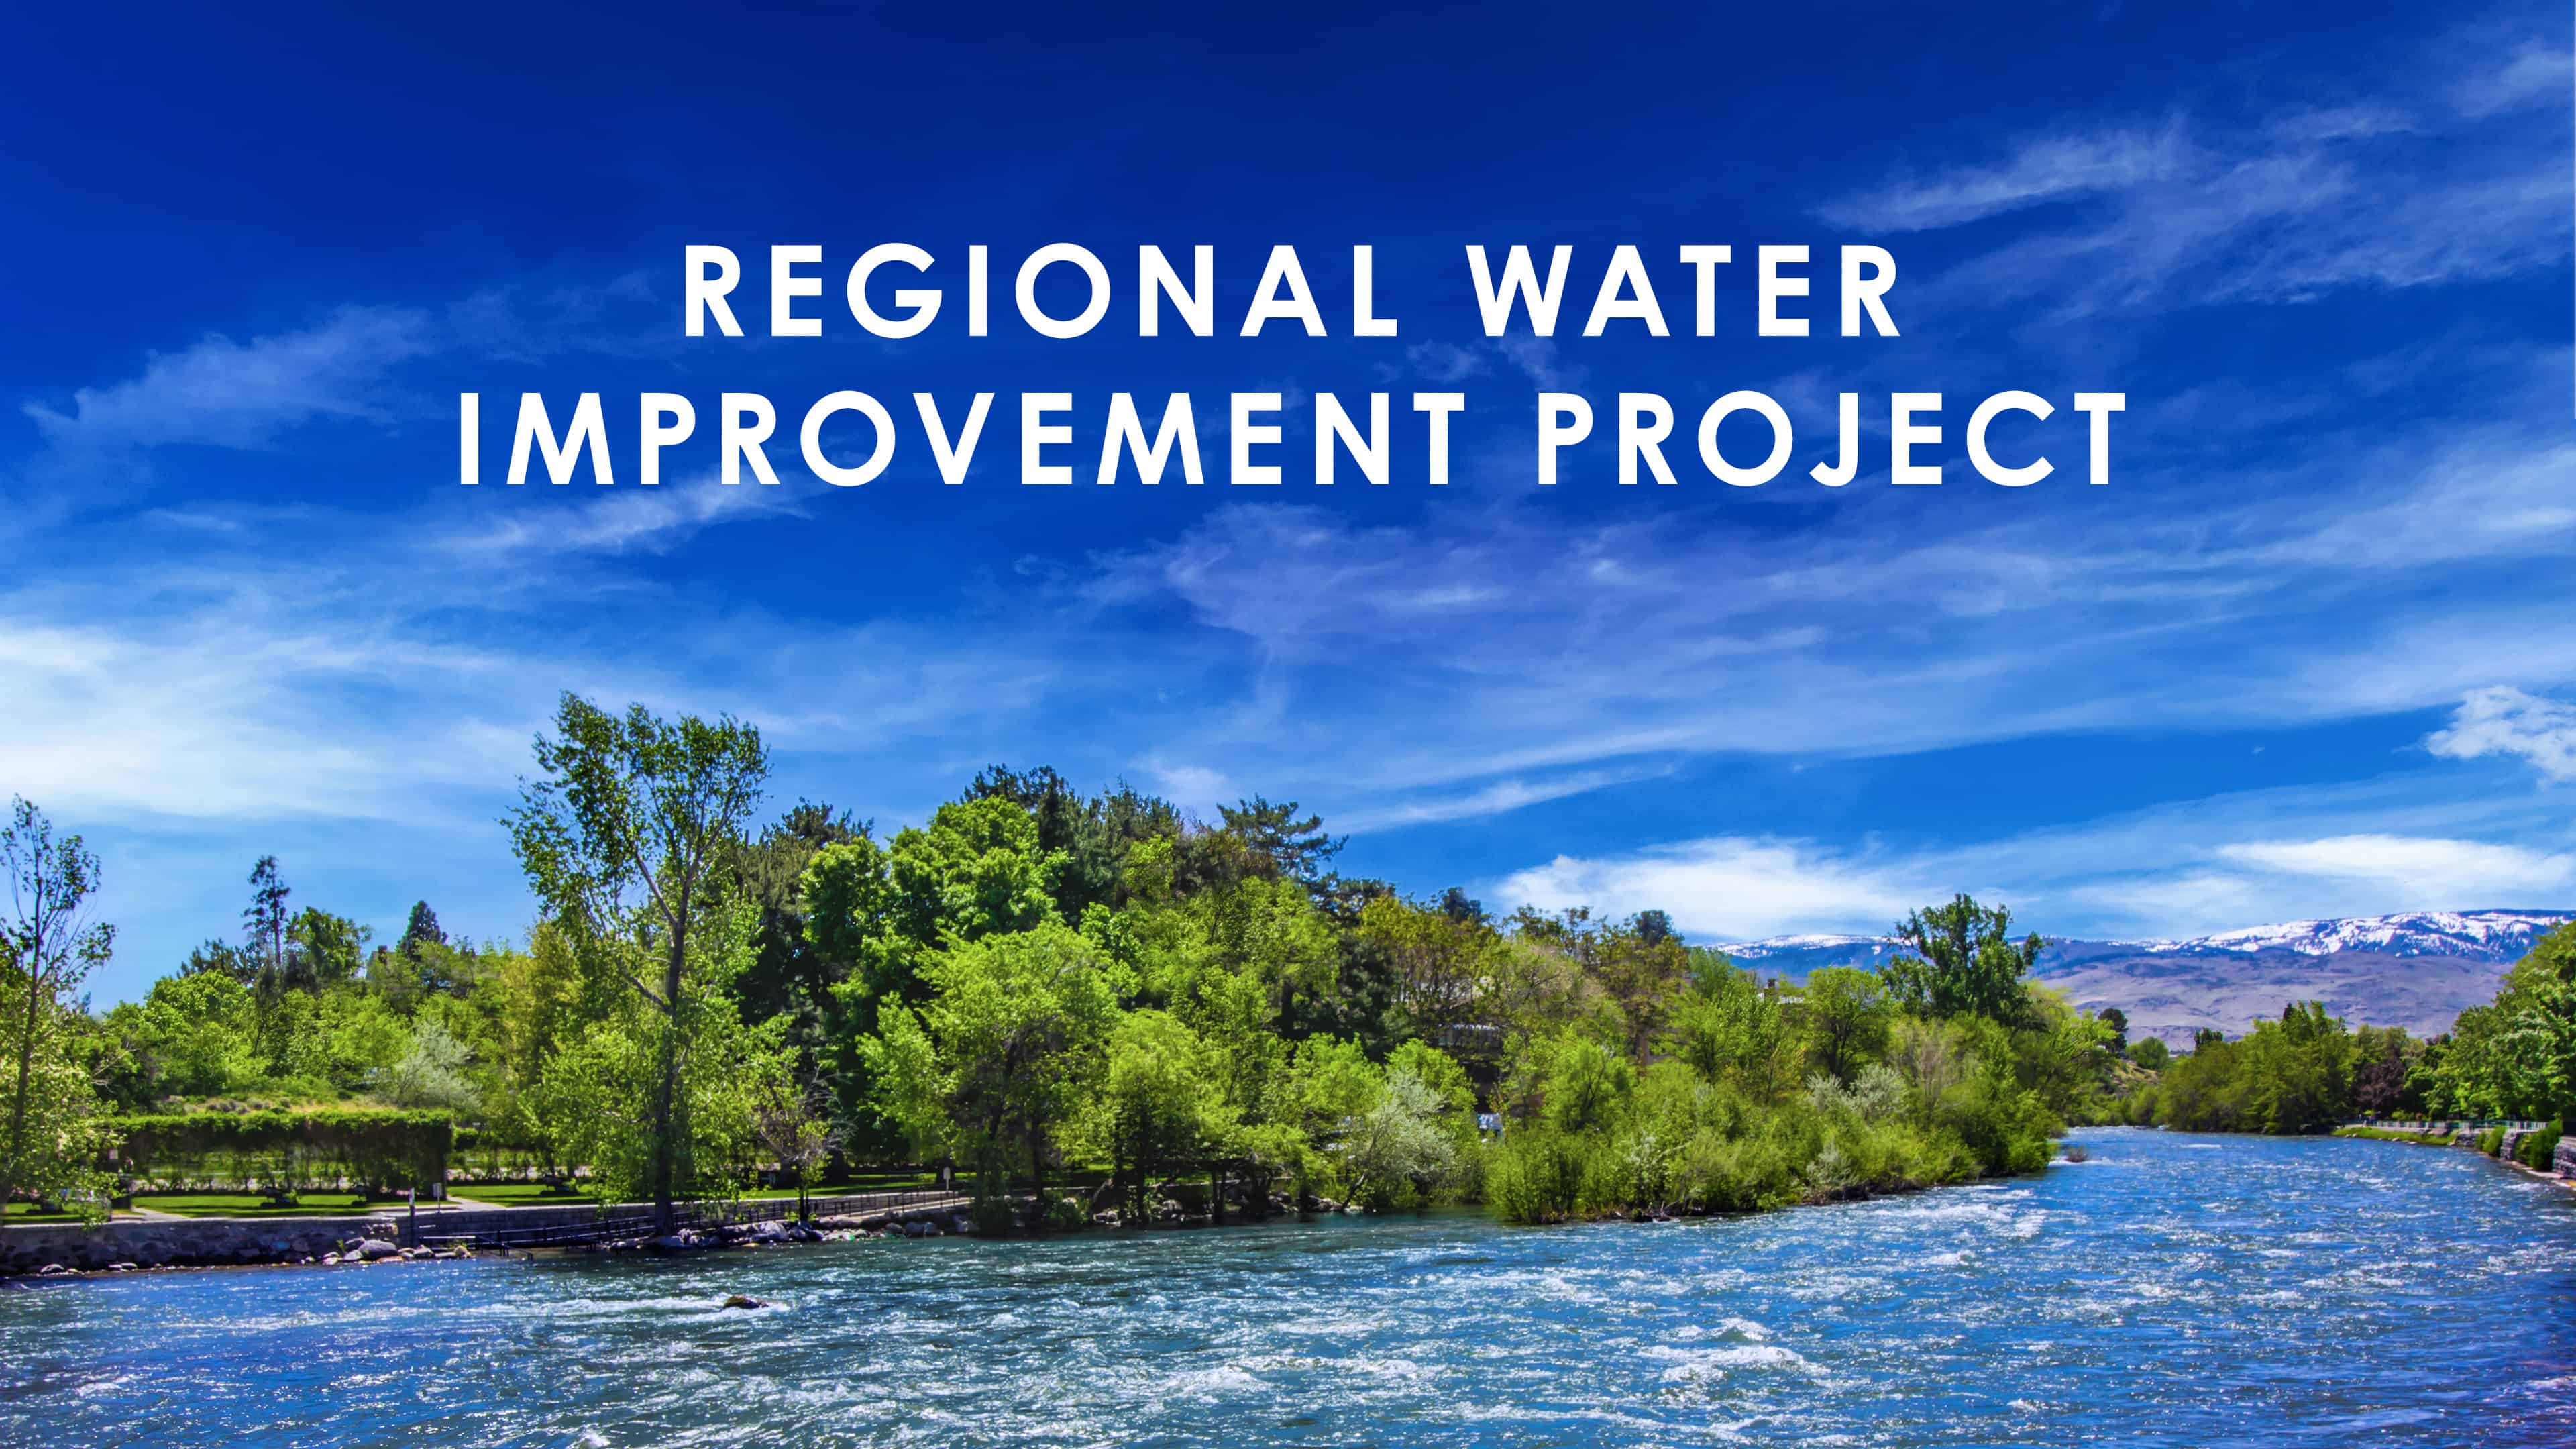 Regional Water Improvement Pipeline Project Commences Bringing Jobs, Economic Growth and Environmental Sustainability